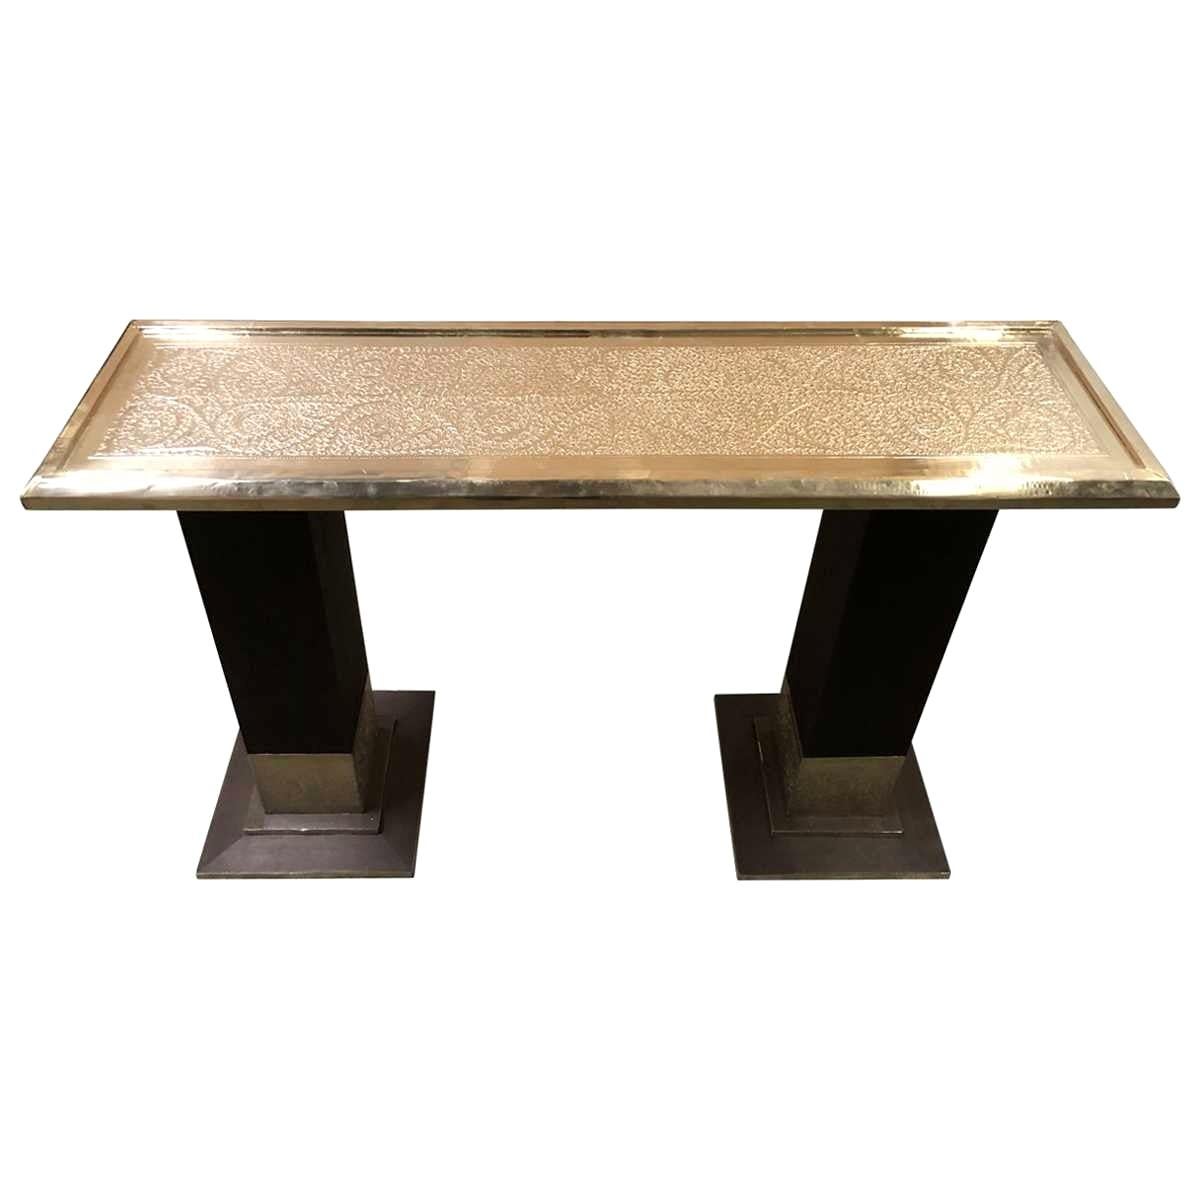 Moroccan Style Hammered Console Table